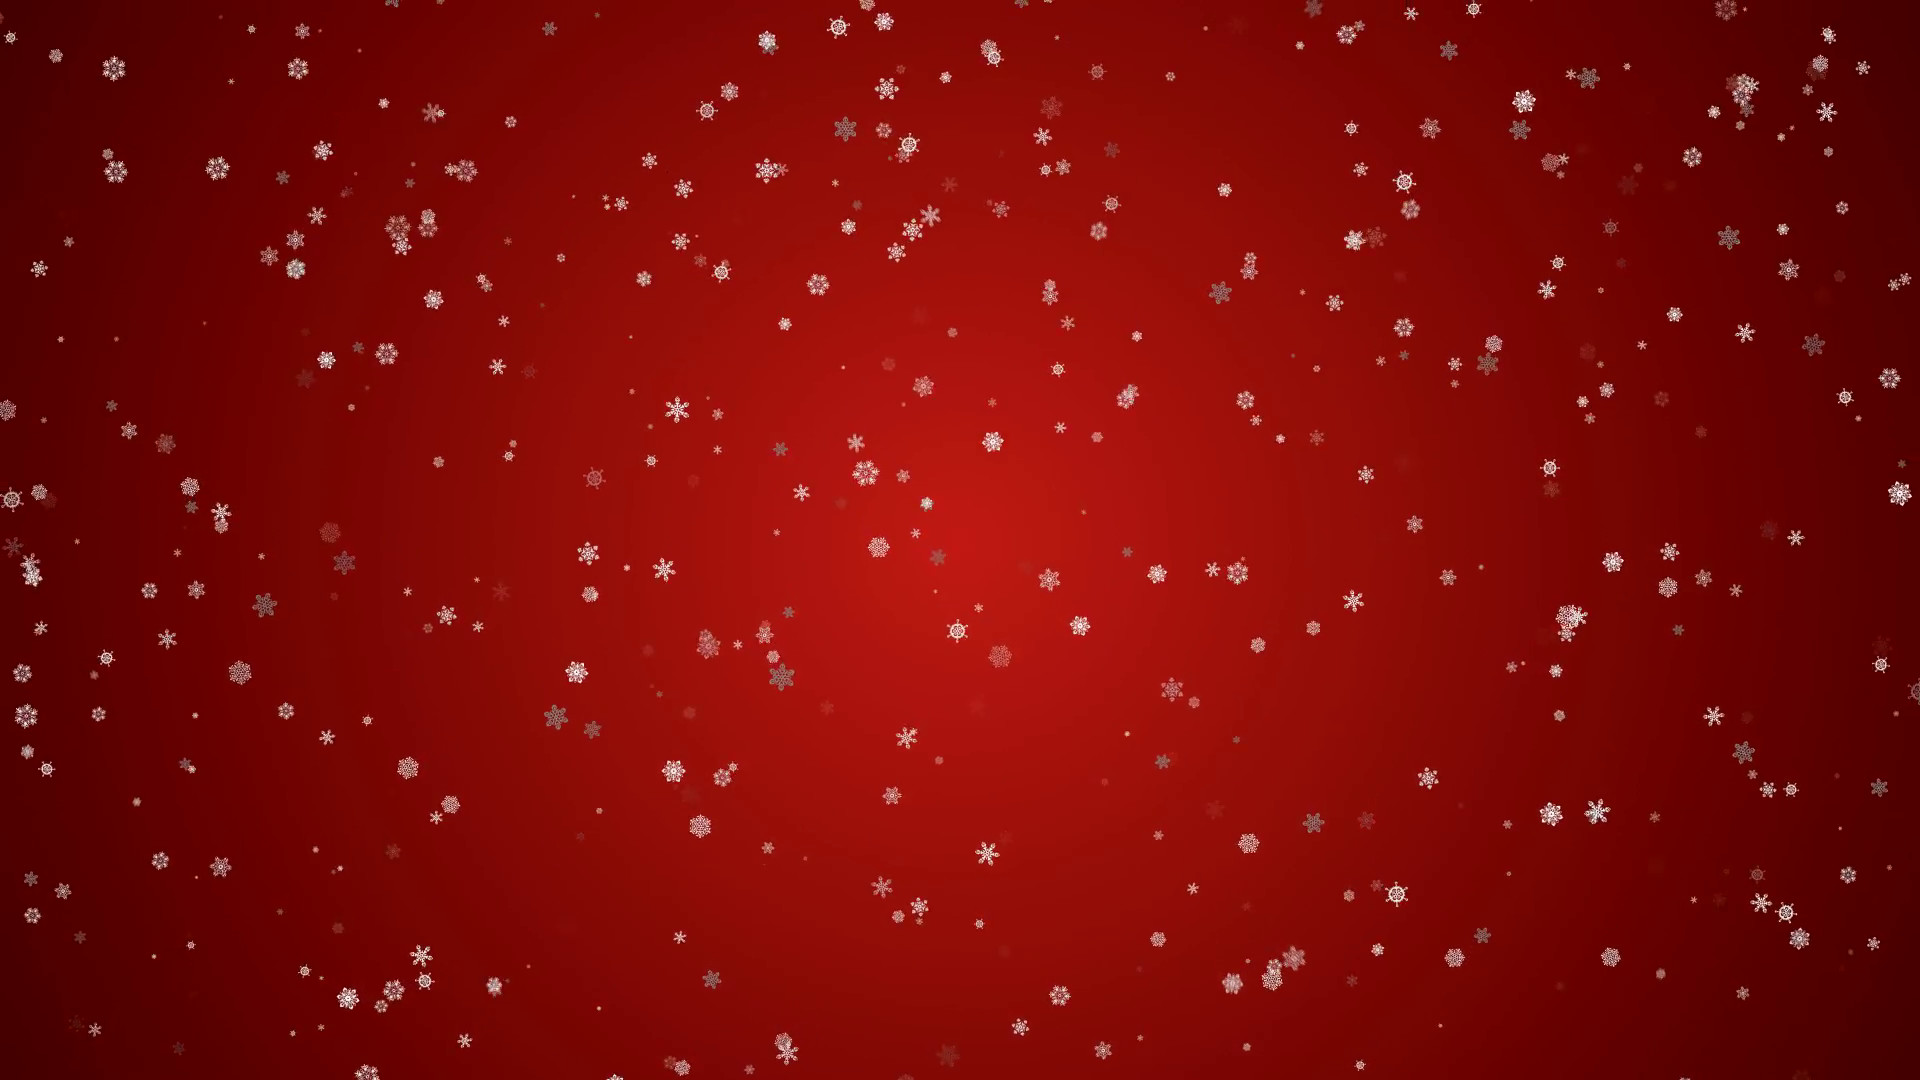 1920x1080 HD 1080 - Christmas Snow Flakes Light Red Background Motion Background -  VideoBlocks